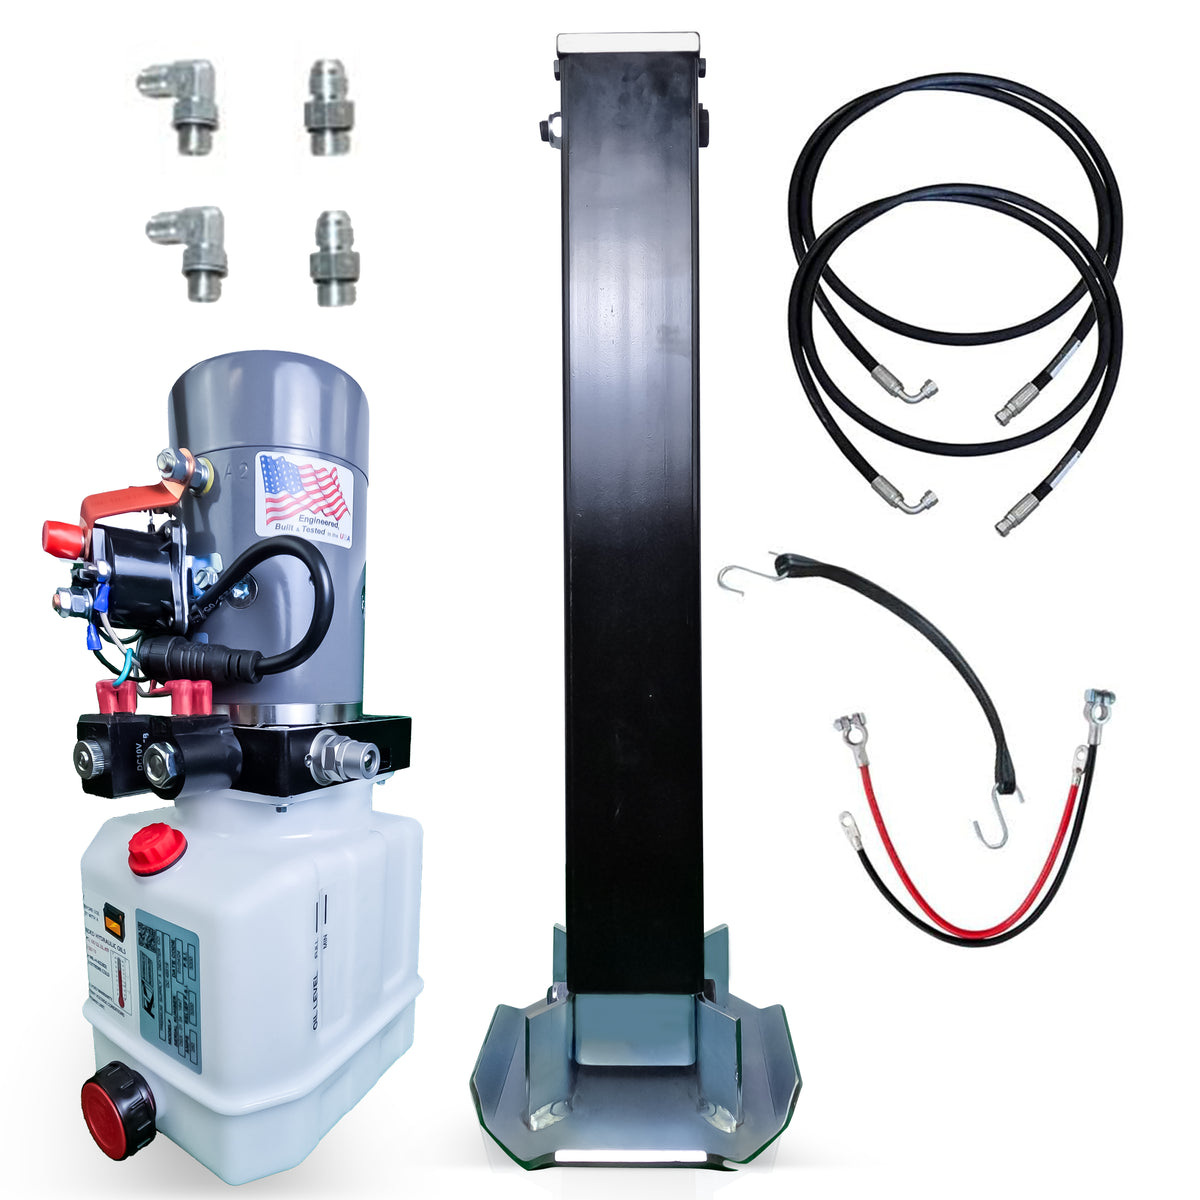 A high-performance 12k Single Hydraulic Trailer Jack Leg Kit, featuring hoses, a powerful hydraulic system, dual holding valve, and zinc-plated components for towing reliability.